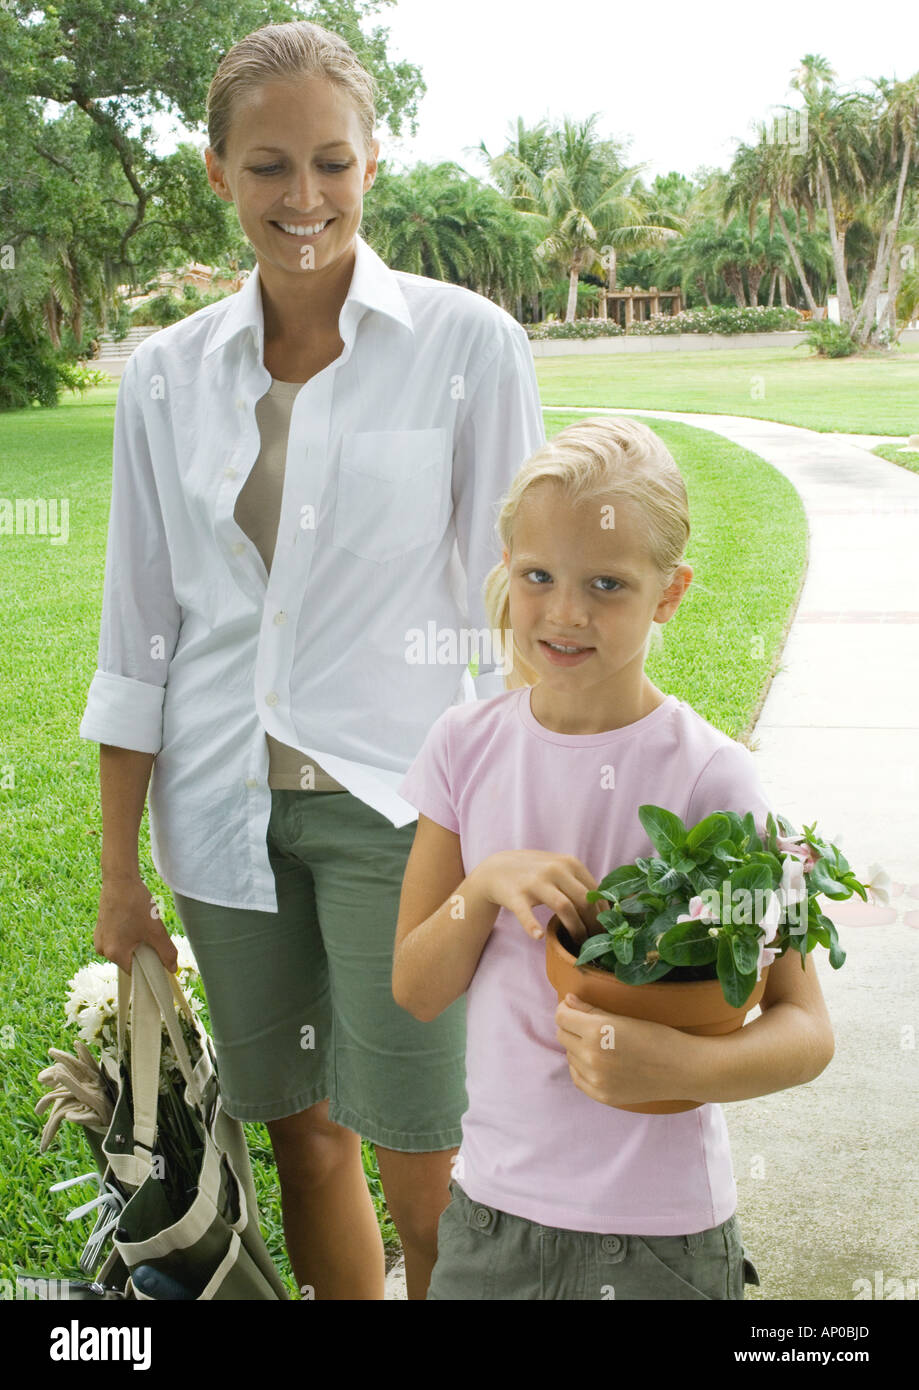 Woman and girl holding gardening supplies Stock Photo